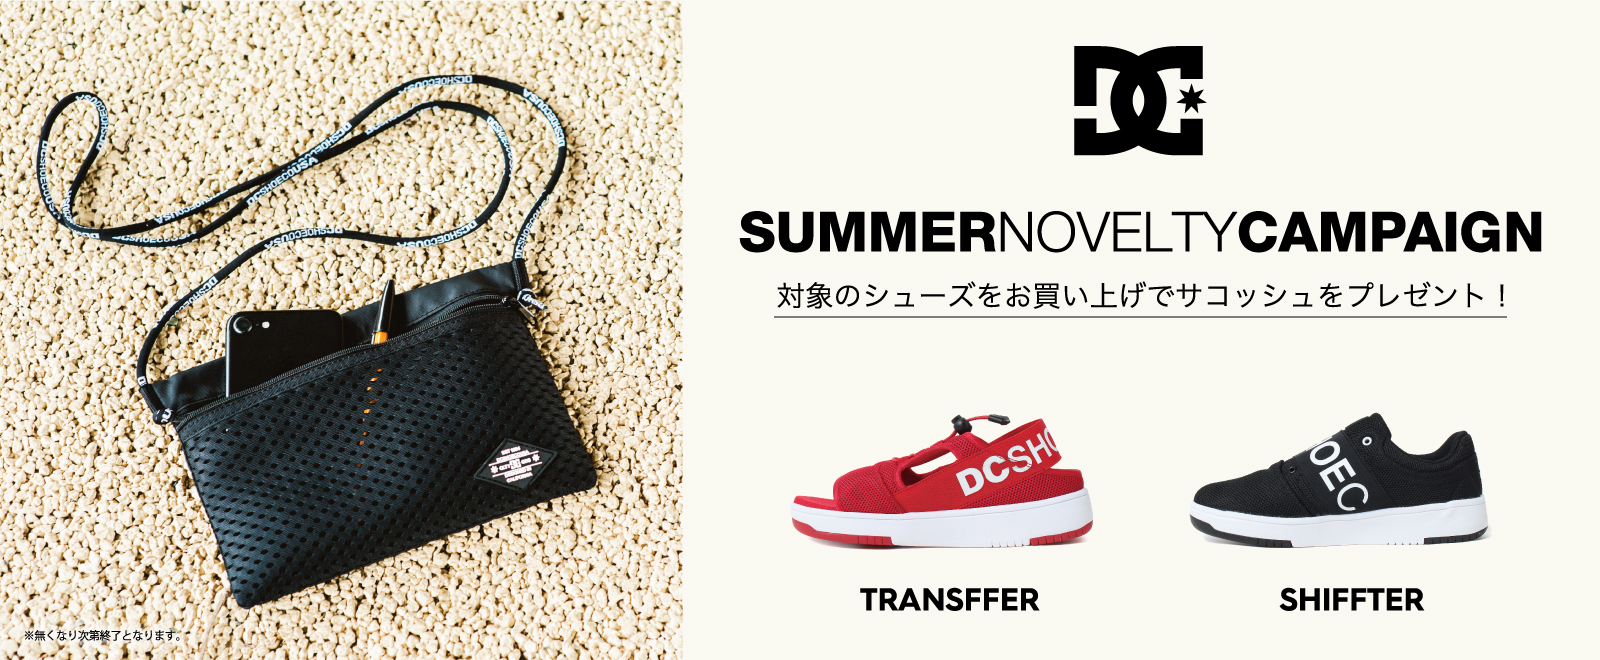 SUMMER NOVELTY CAMPAIGN